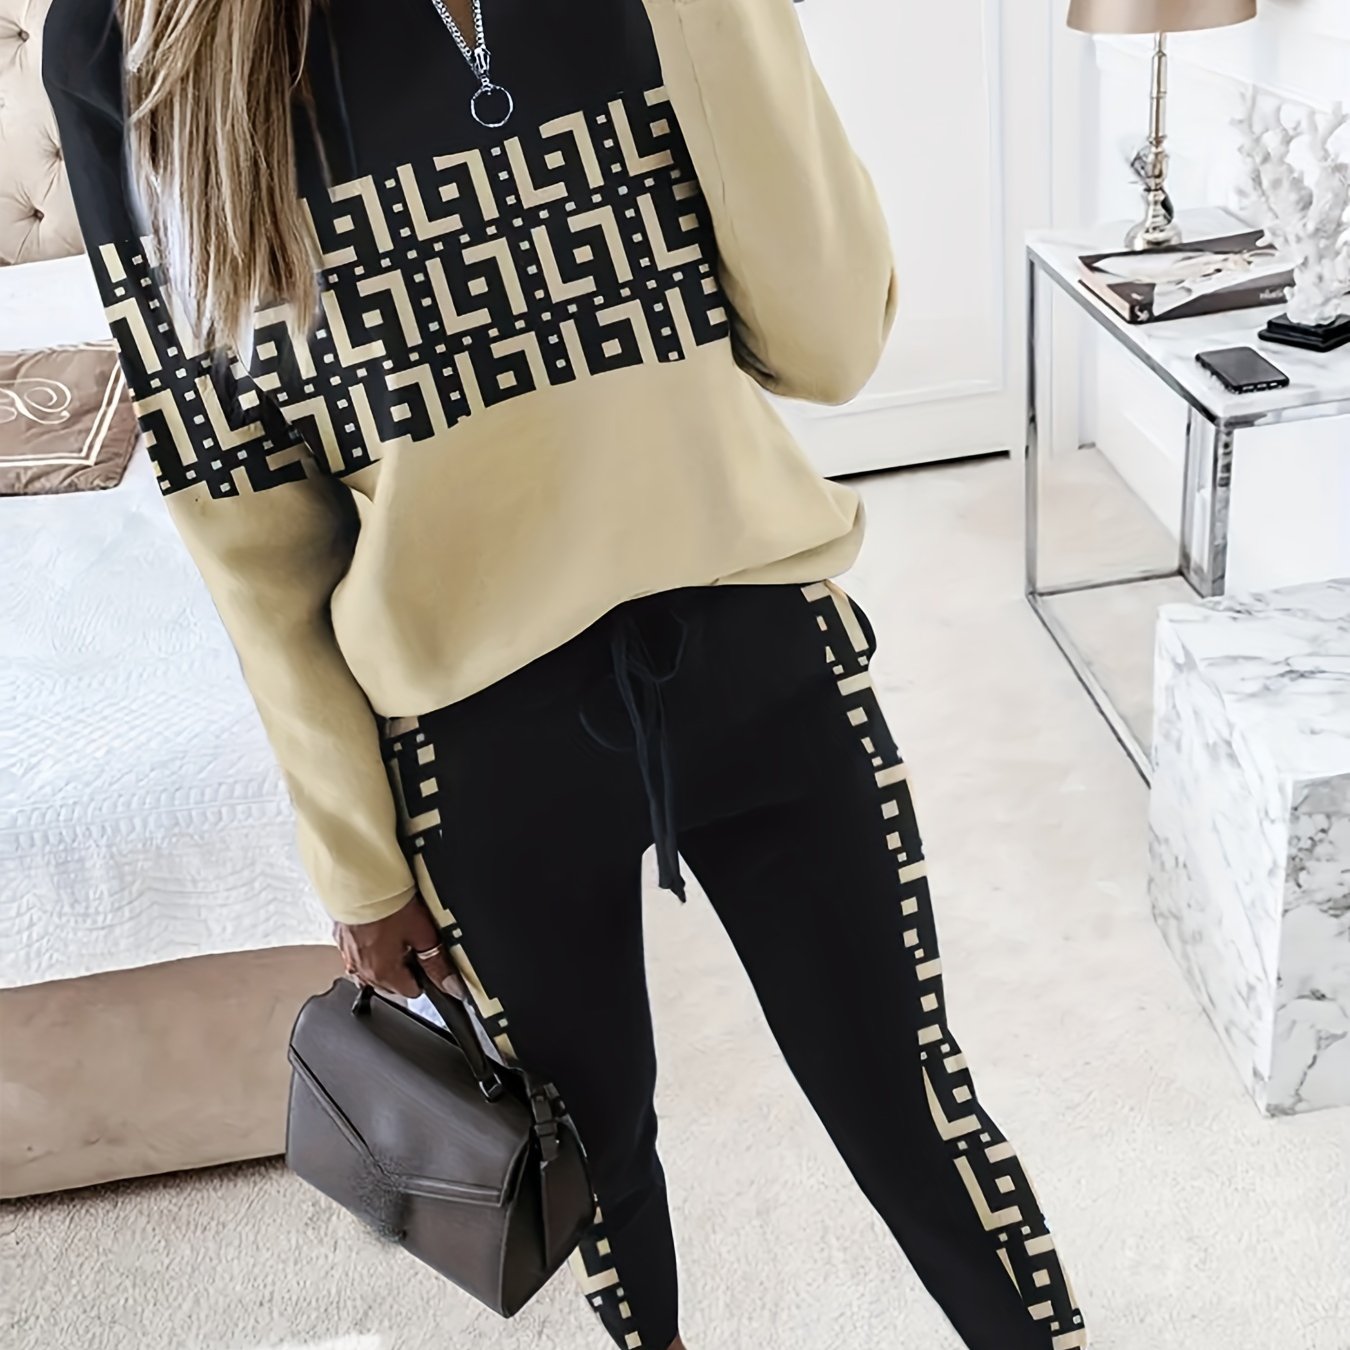 Antmvs Graphic Print Casual Two-piece Set, Color Block Zipper Tops & Drawstring Long Length Pants Outfits, Women's Clothing